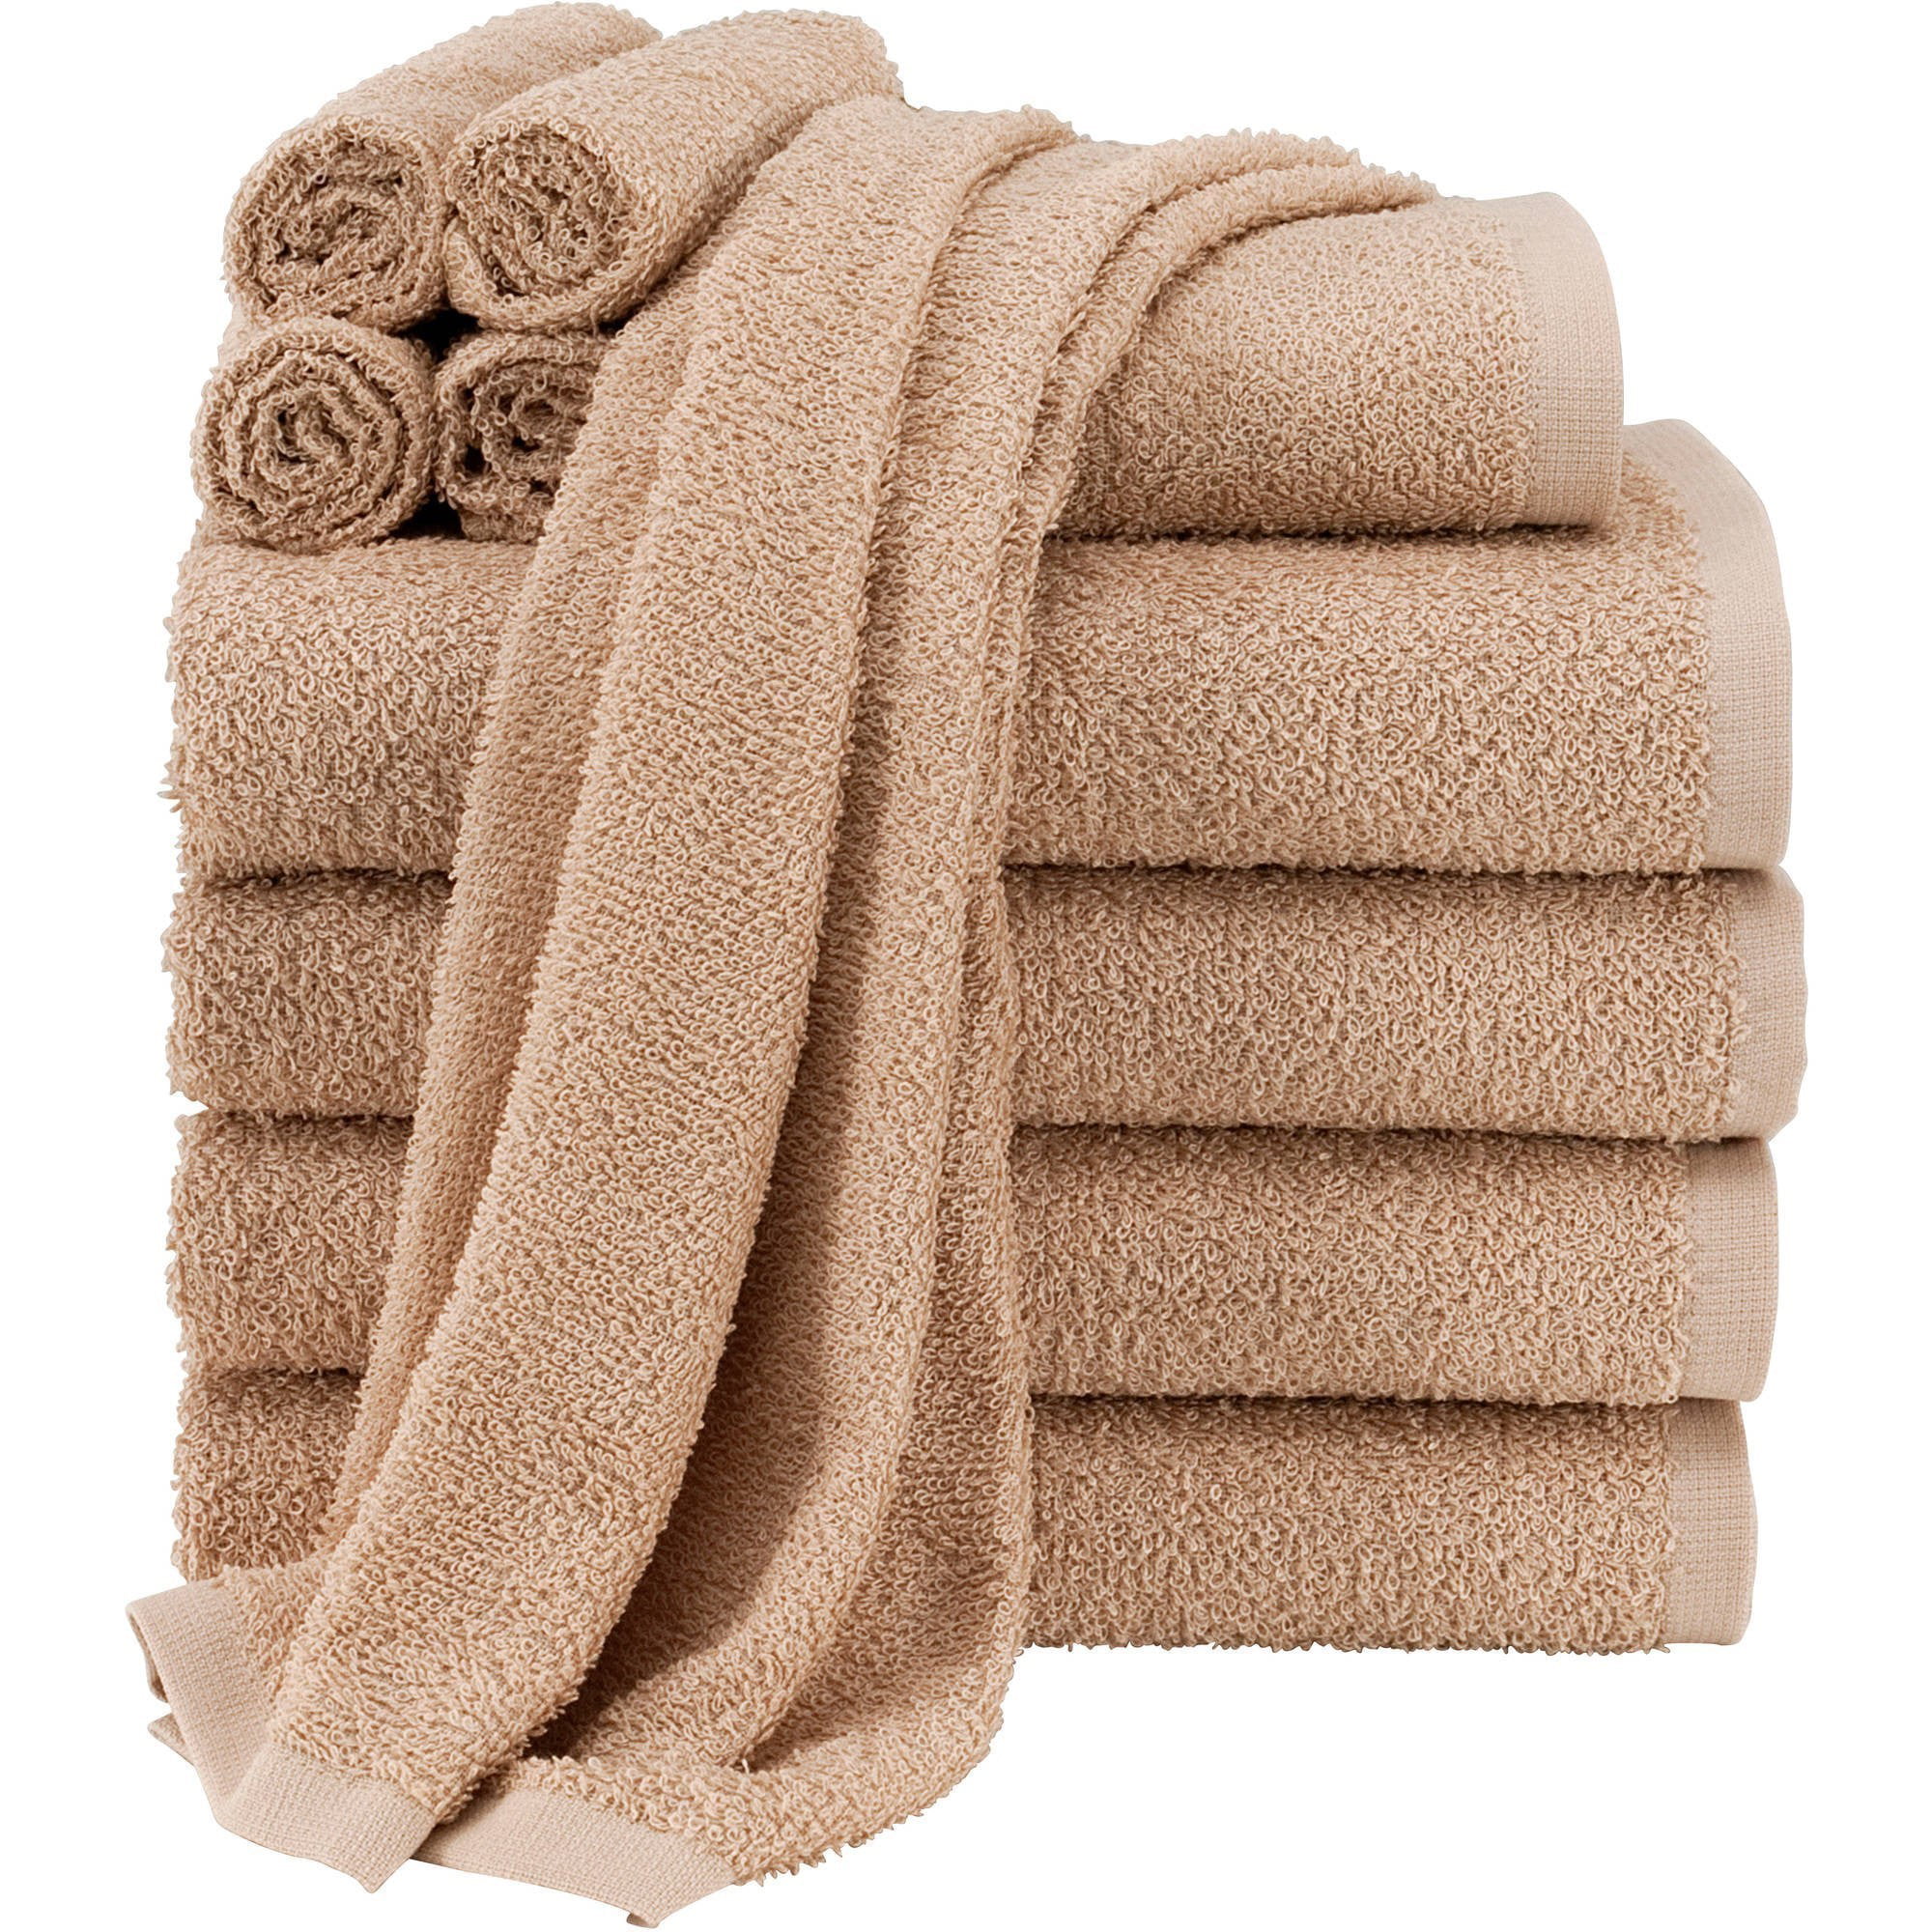 Eco-Friendly Bathroom Towels Dark Grey Woven Solid Color Absorbent Towels 12-Pack Washcloth Set PureSoft Collection 